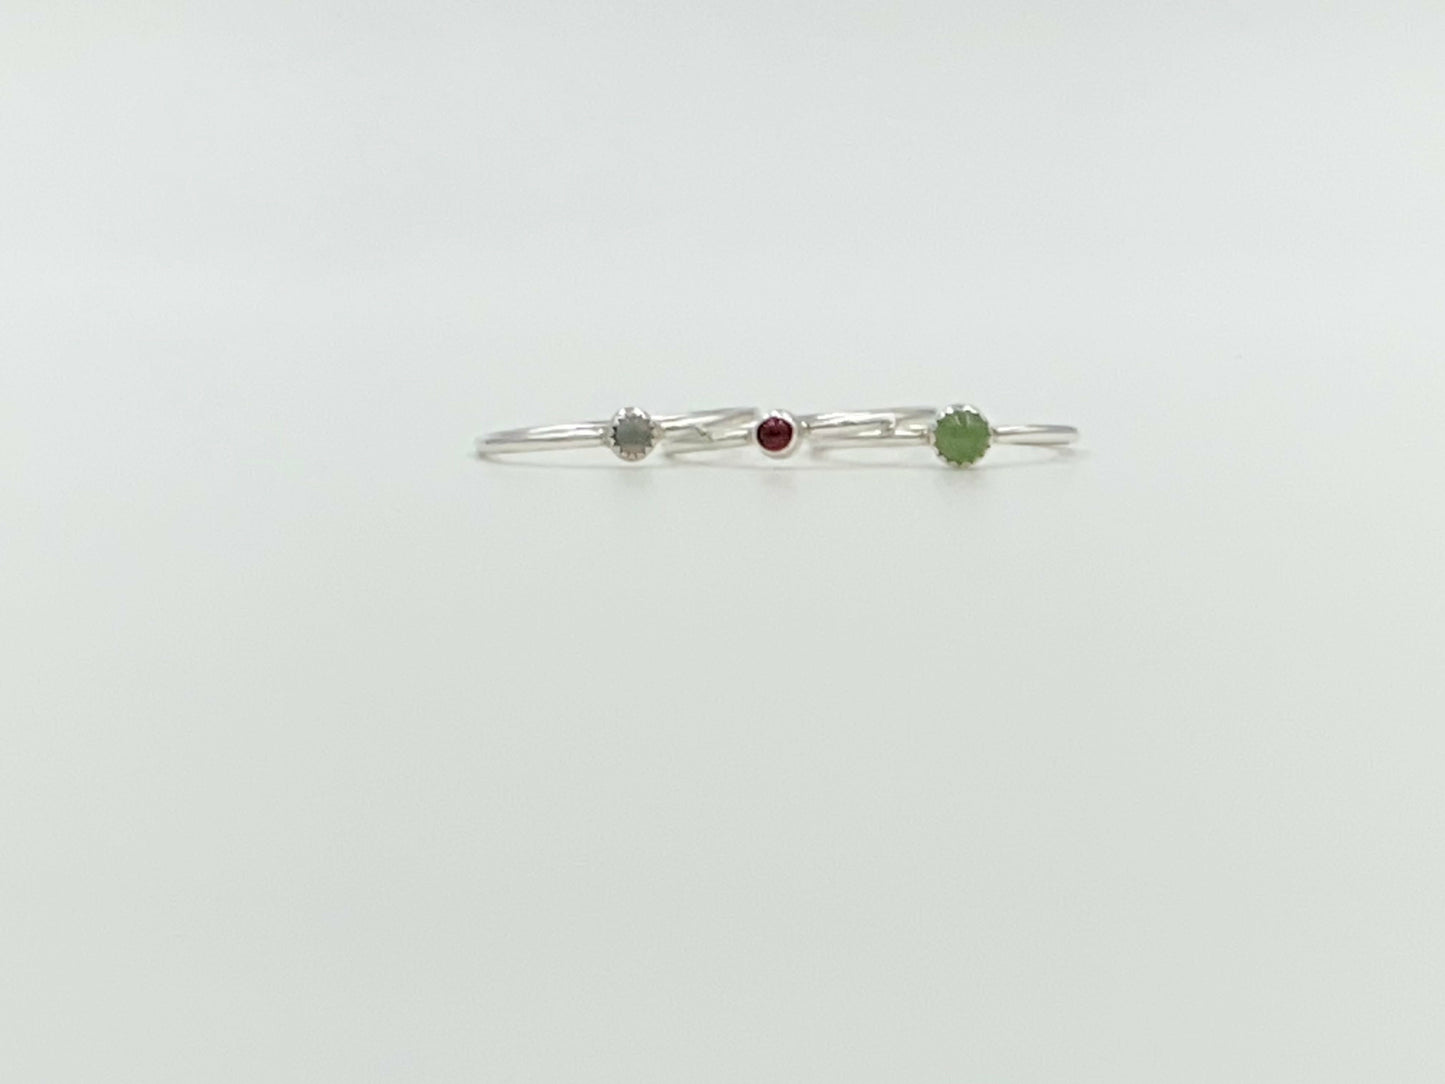 Small stackable ring mounted on a round wire. Your choice of stone.